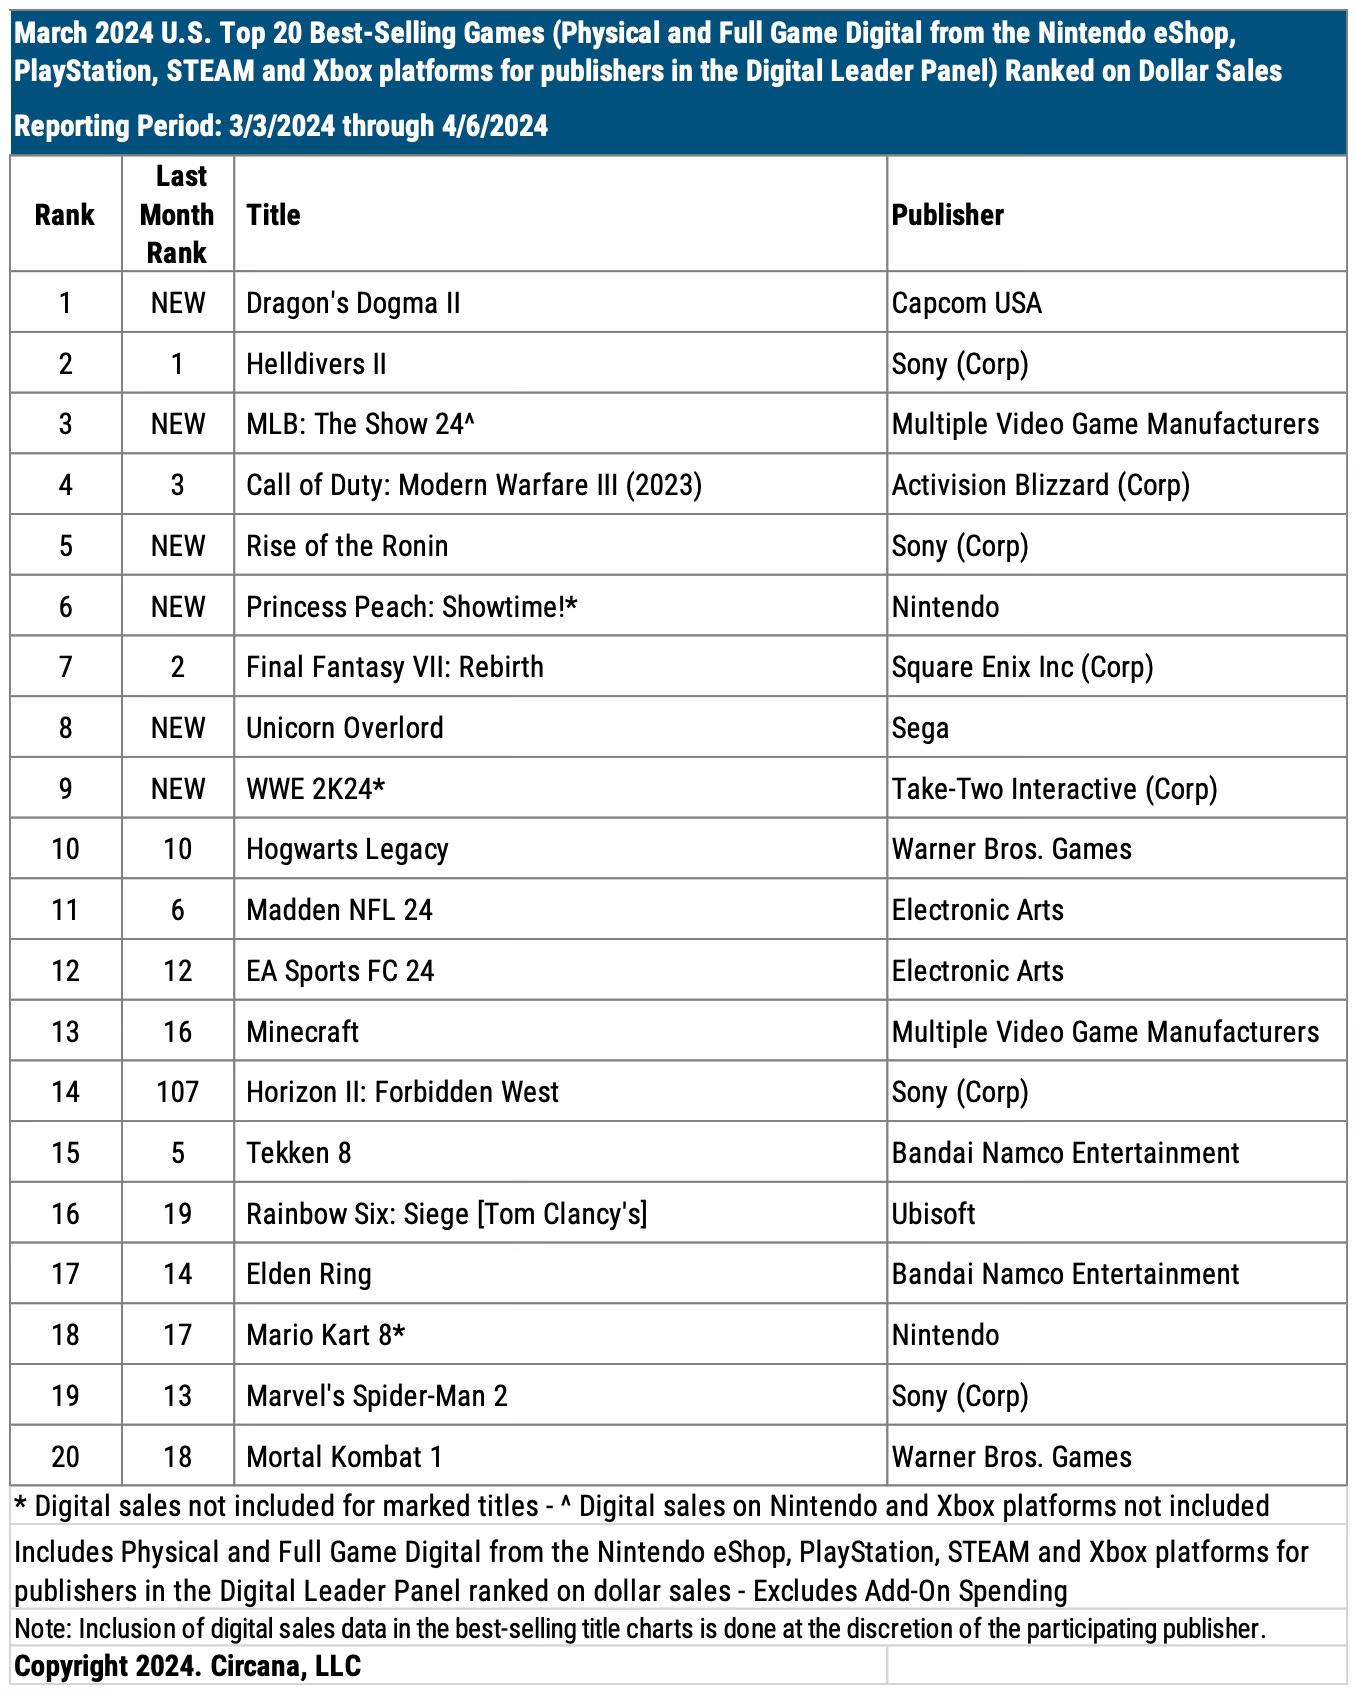 Chart showing the Top 20 Best-Selling Games in the U.S. in March 2024